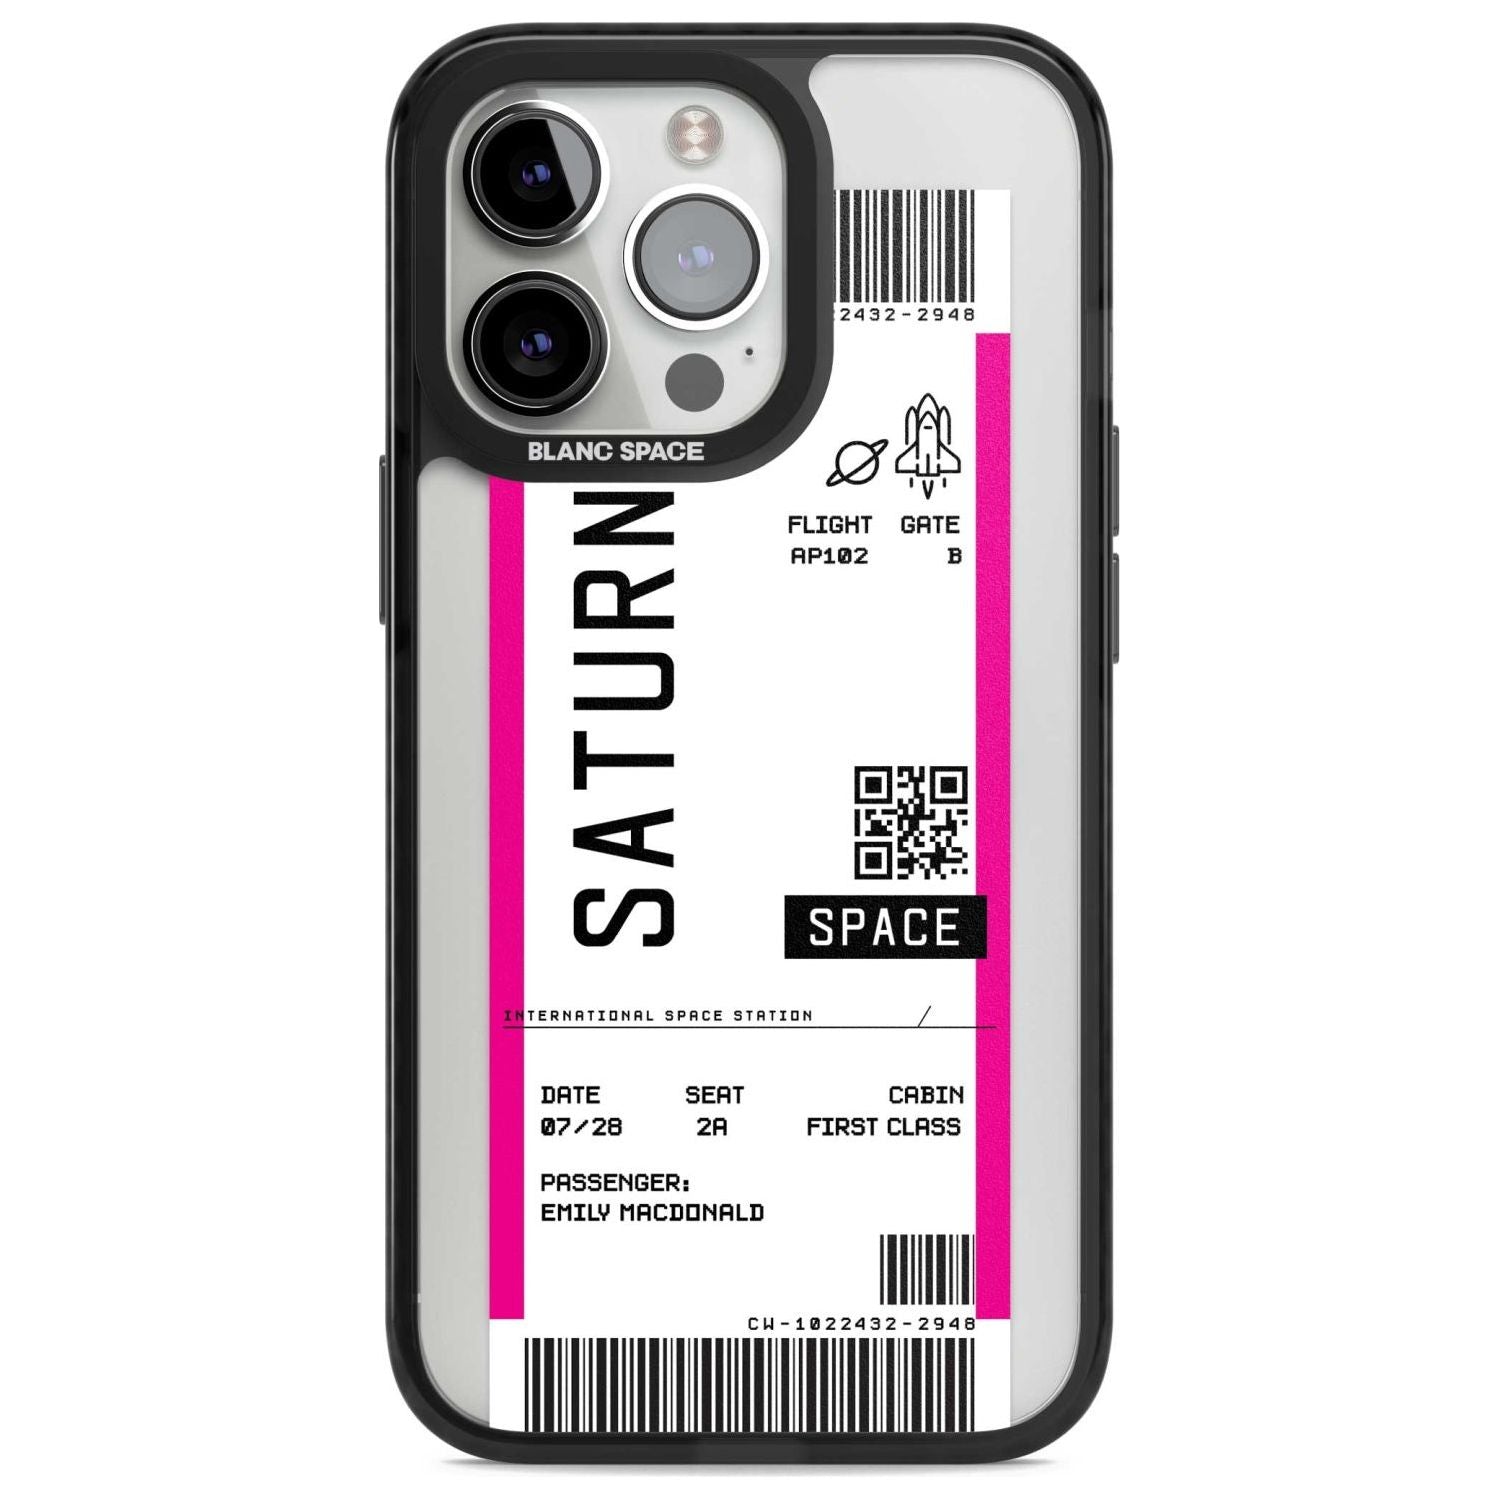 Personalised Saturn Space Travel Ticket Custom Phone Case iPhone 15 Pro Max / Magsafe Black Impact Case,iPhone 15 Pro / Magsafe Black Impact Case,iPhone 14 Pro Max / Magsafe Black Impact Case,iPhone 14 Pro / Magsafe Black Impact Case,iPhone 13 Pro / Magsafe Black Impact Case Blanc Space